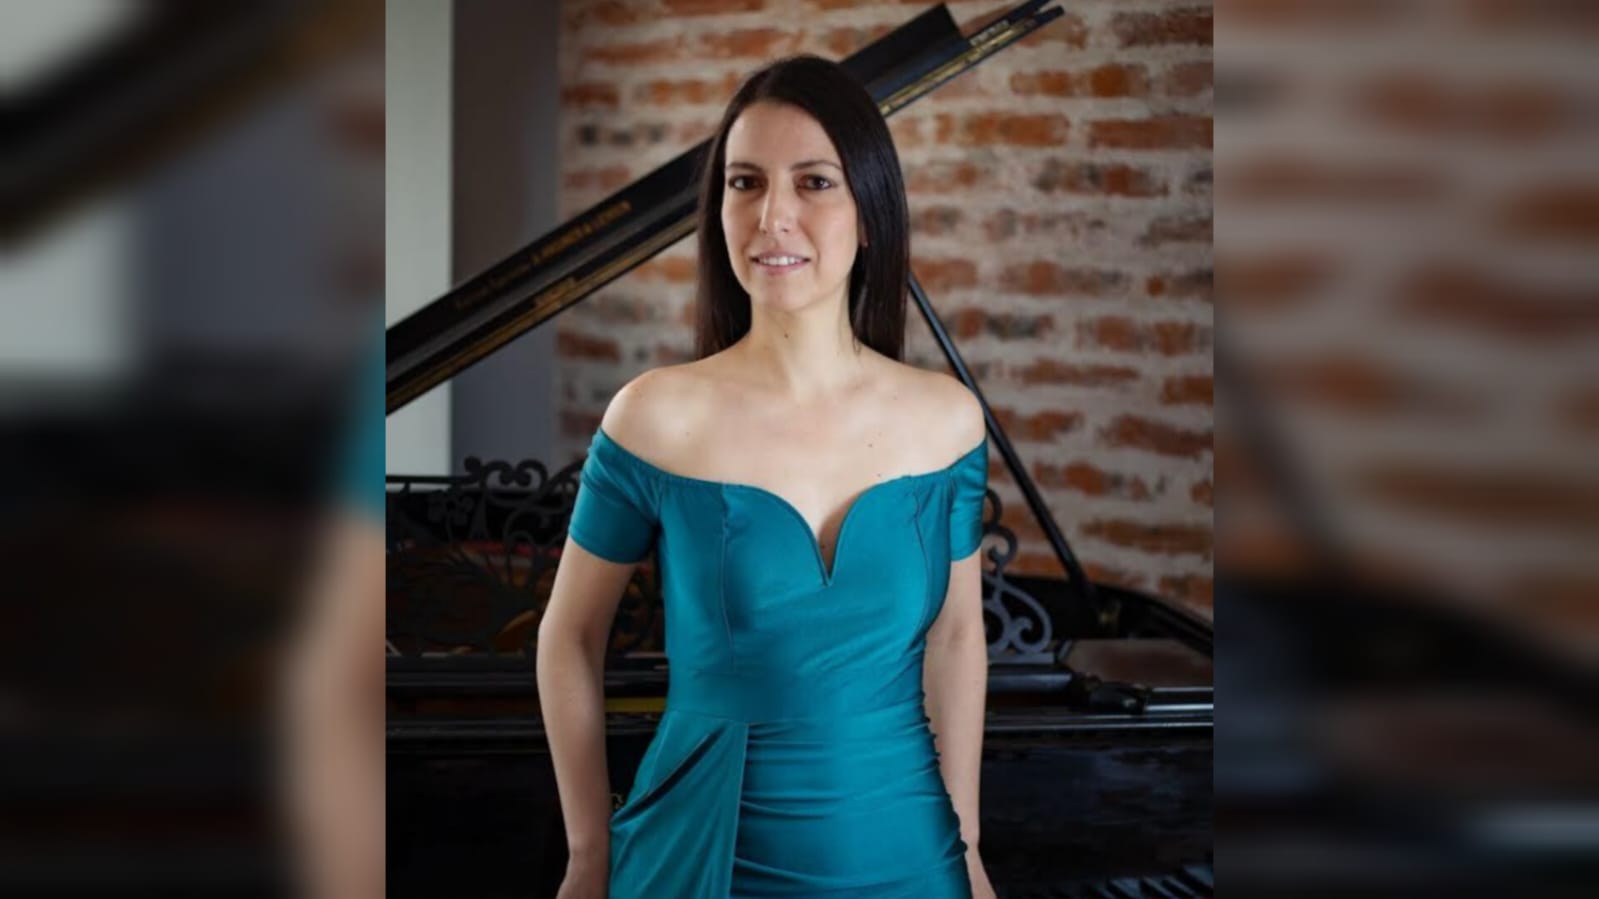 Free registration for masterclass with Mexican pianist starts this Wednesday